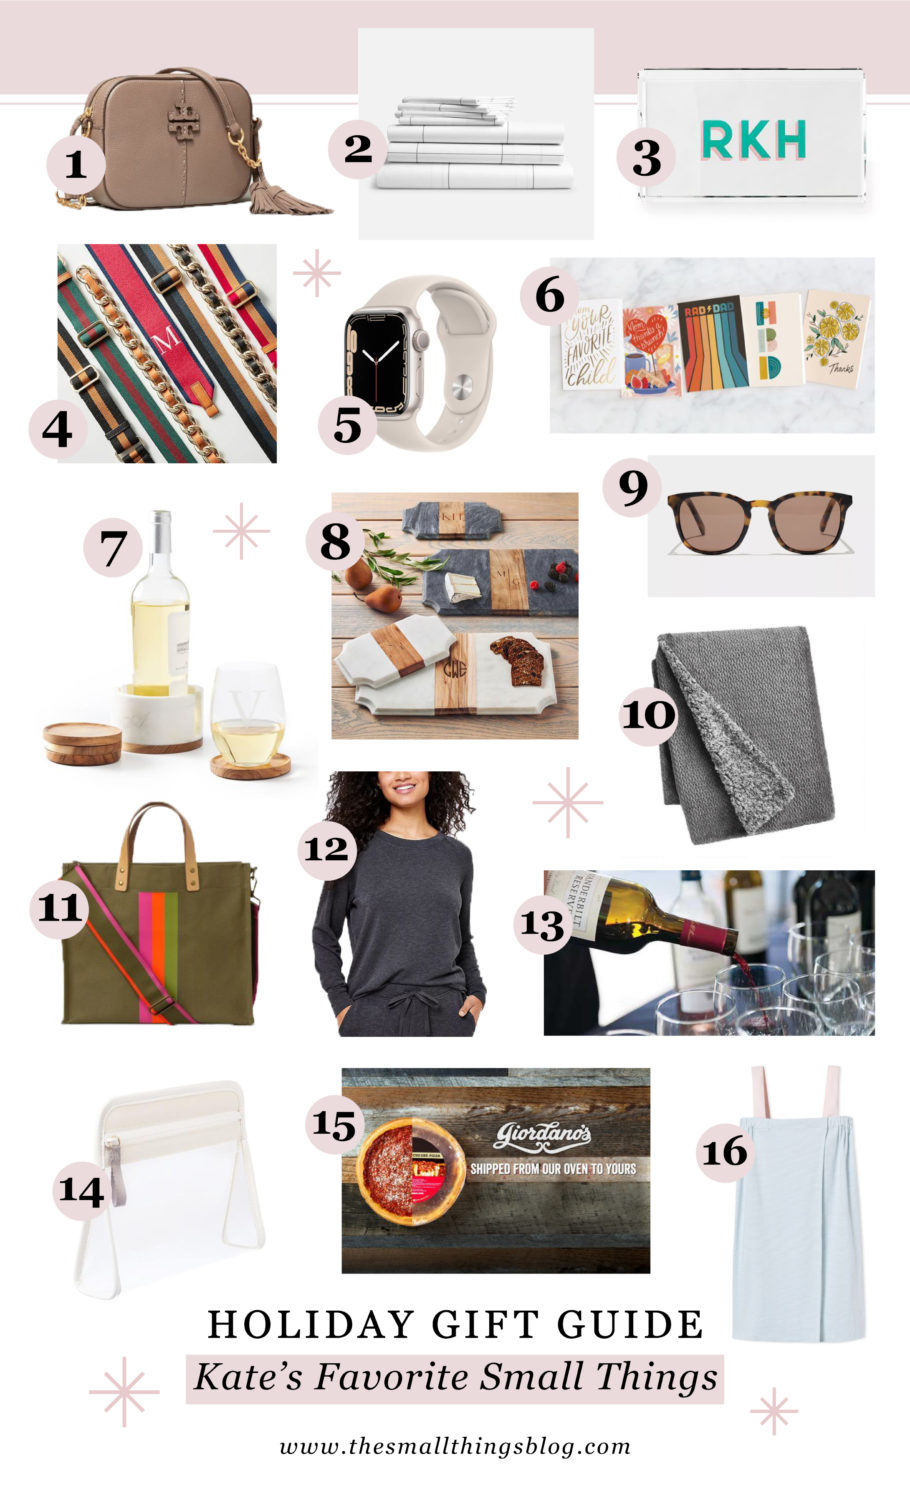 2021 Holiday Gift Guide featuring Kate’s Favorite Small Things! (+ a giveaway!)